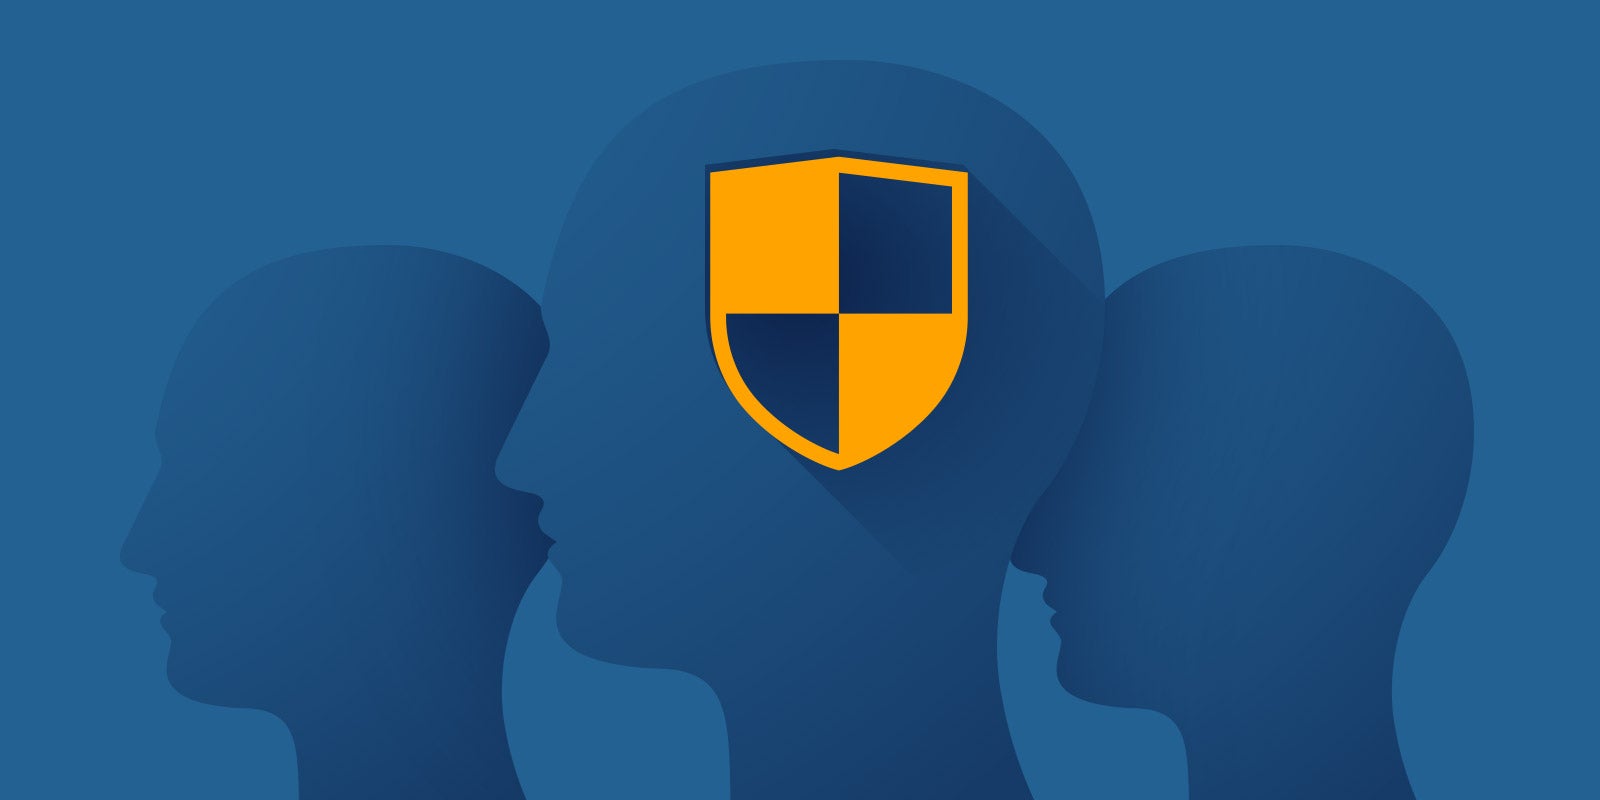 Shadow of the profile of three people's heads with a shield over brain area to represent psychological safety at work